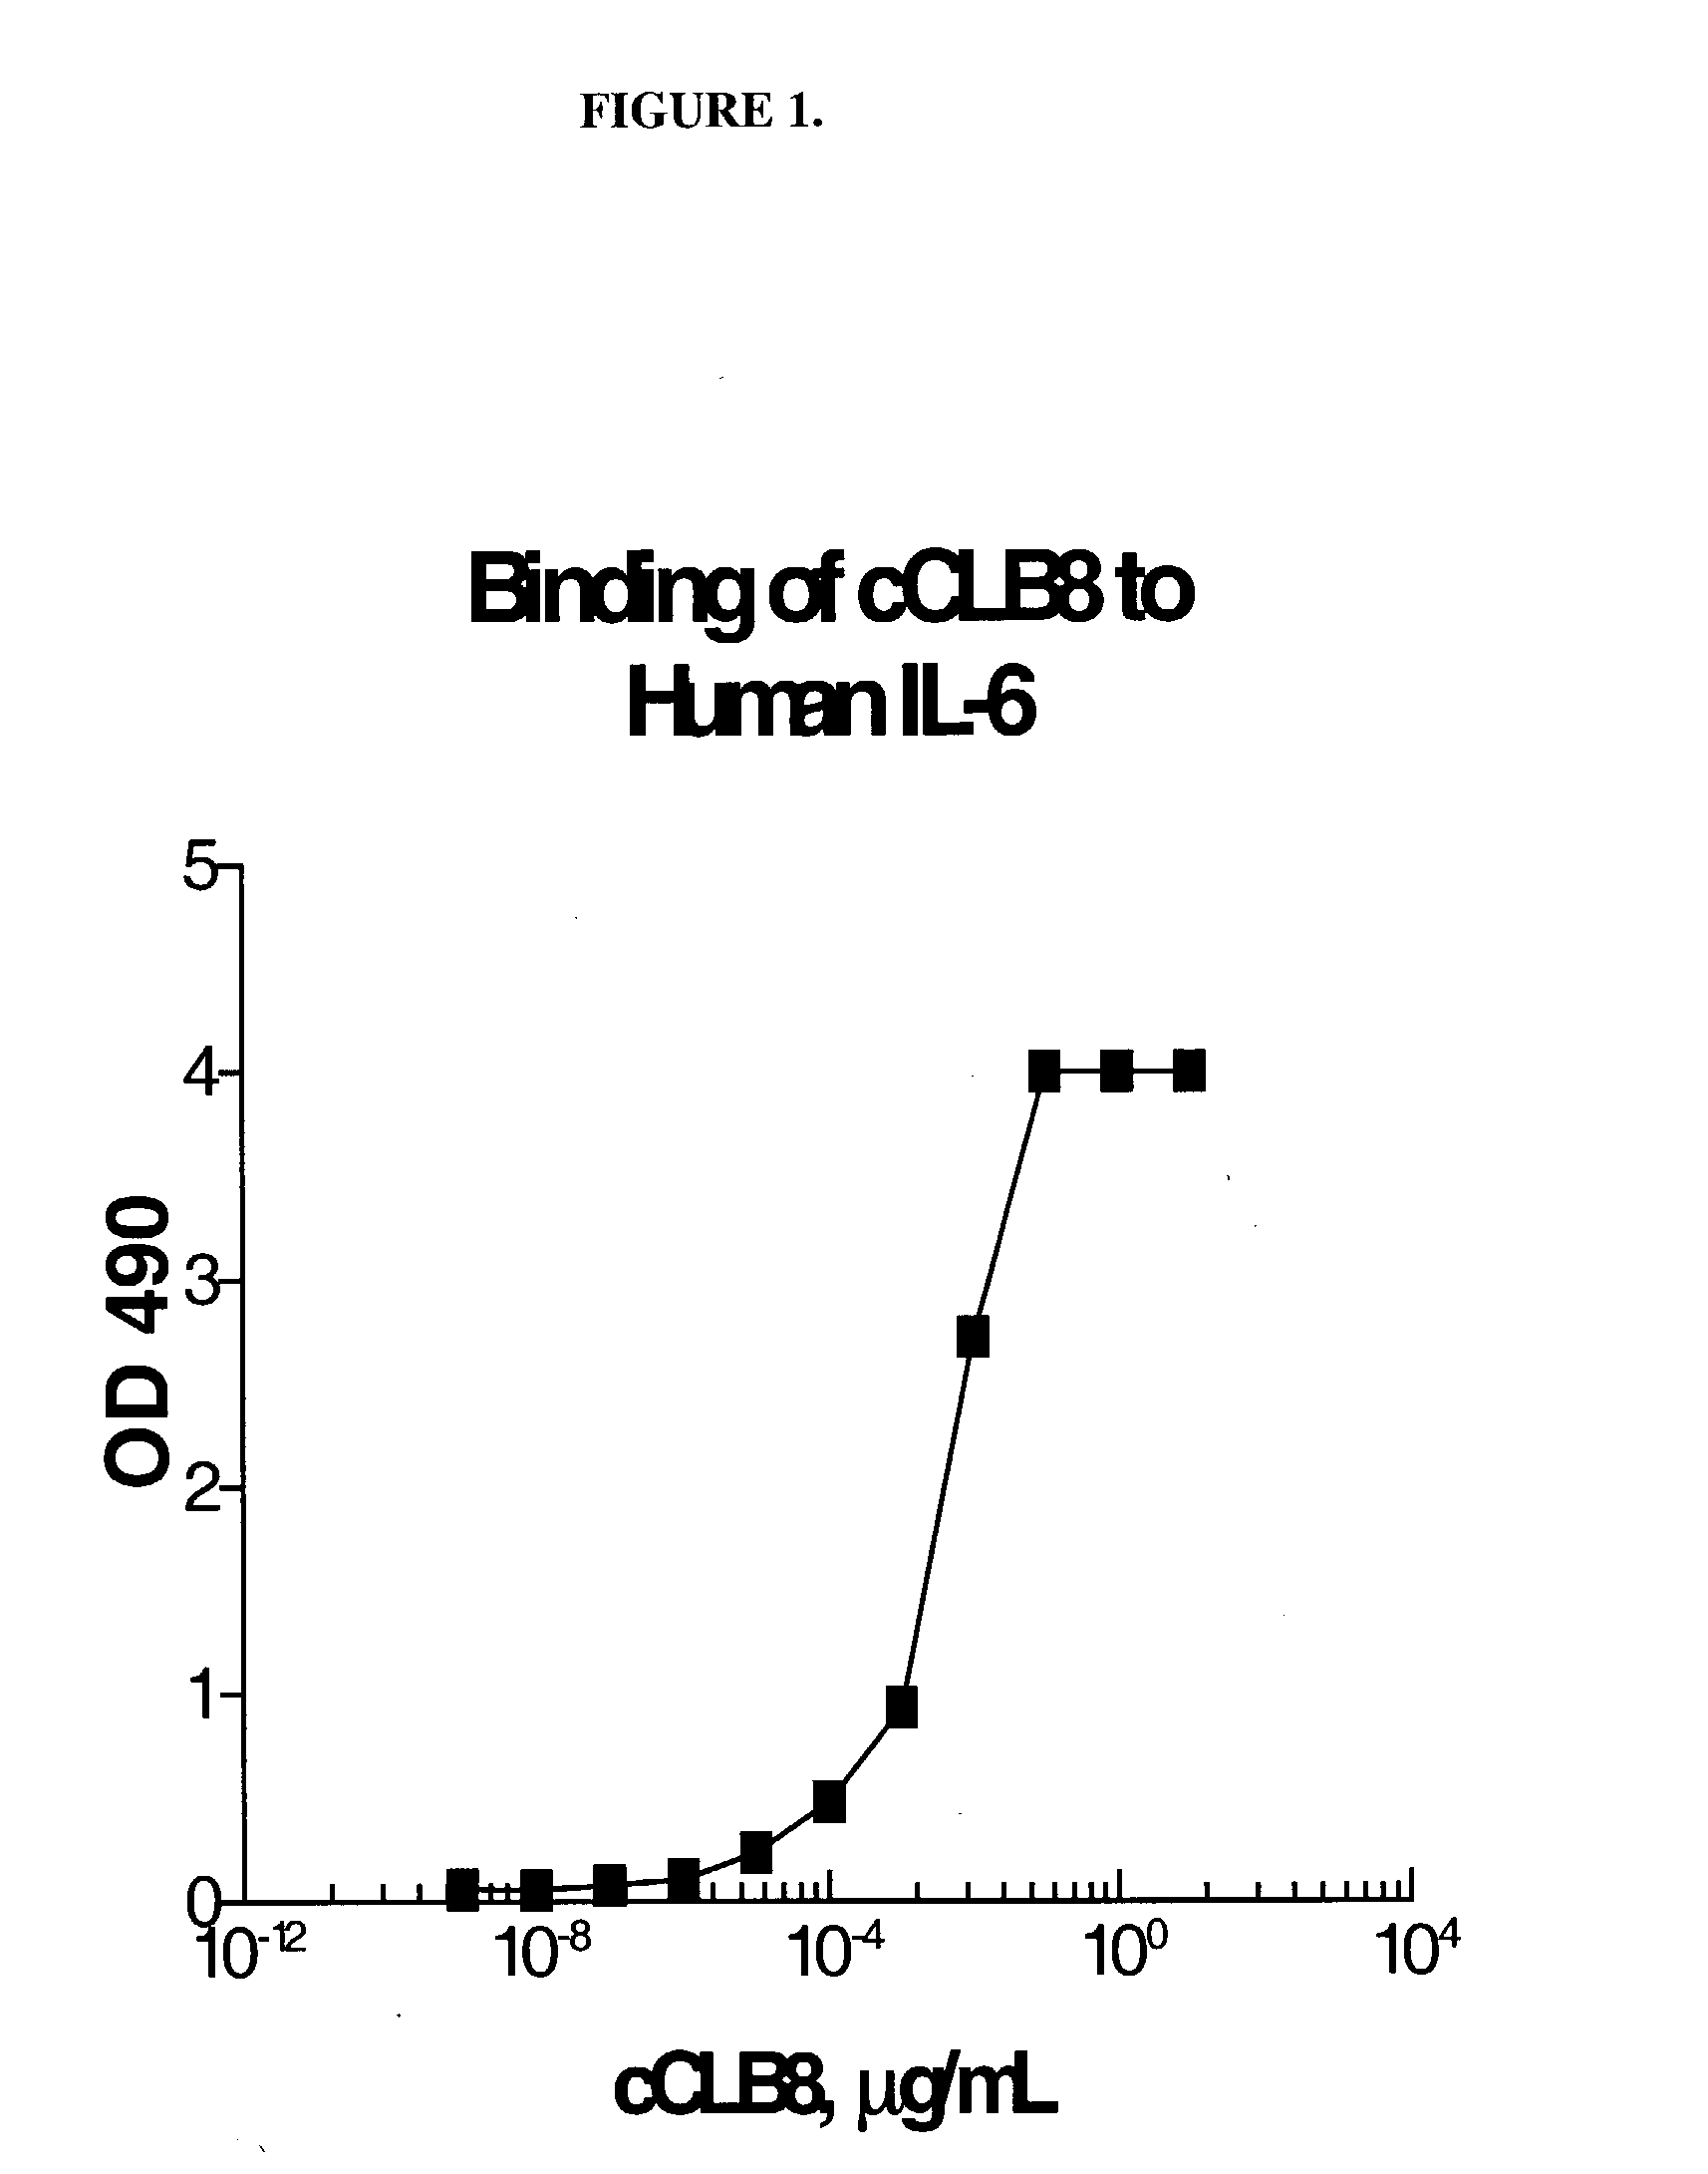 Anti-IL-6 antibodies, compositions, methods and uses